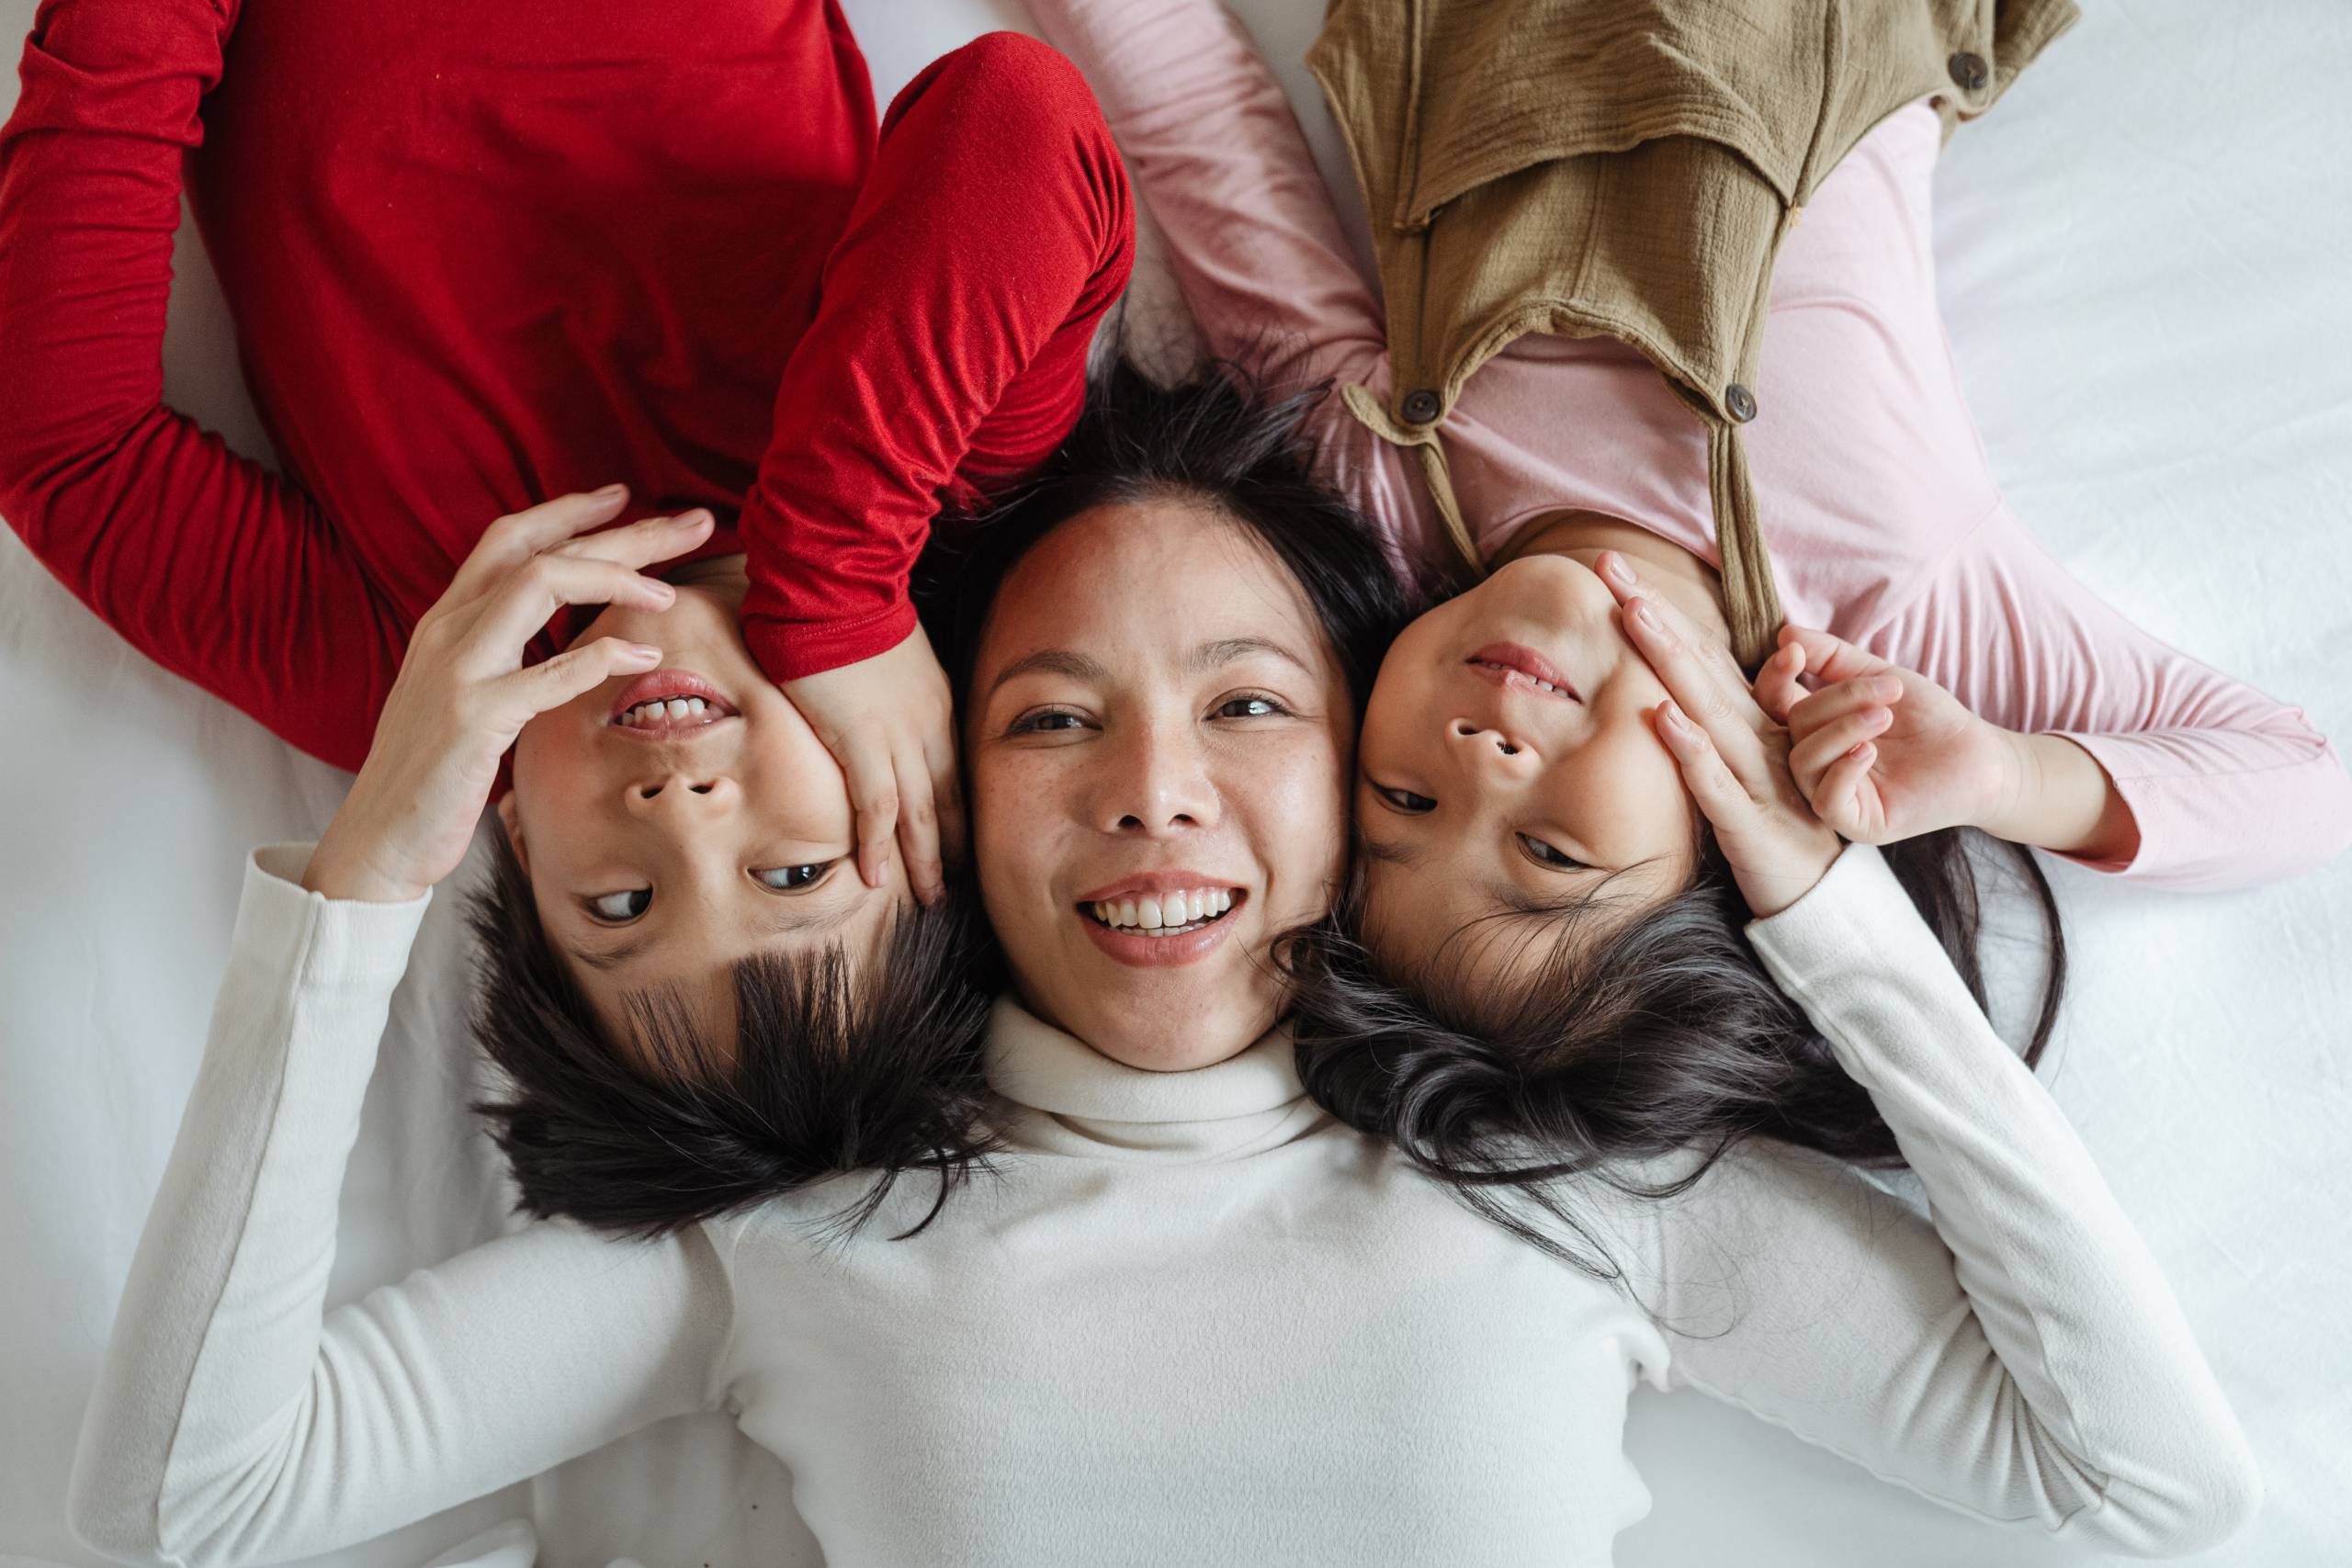 A woman wearing a white turtleneck is lying on a bed with two children on either side of her. One of them is a boy wearing a red shirt, and to her right is a girl wearing a light pink shirt and brown overalls.